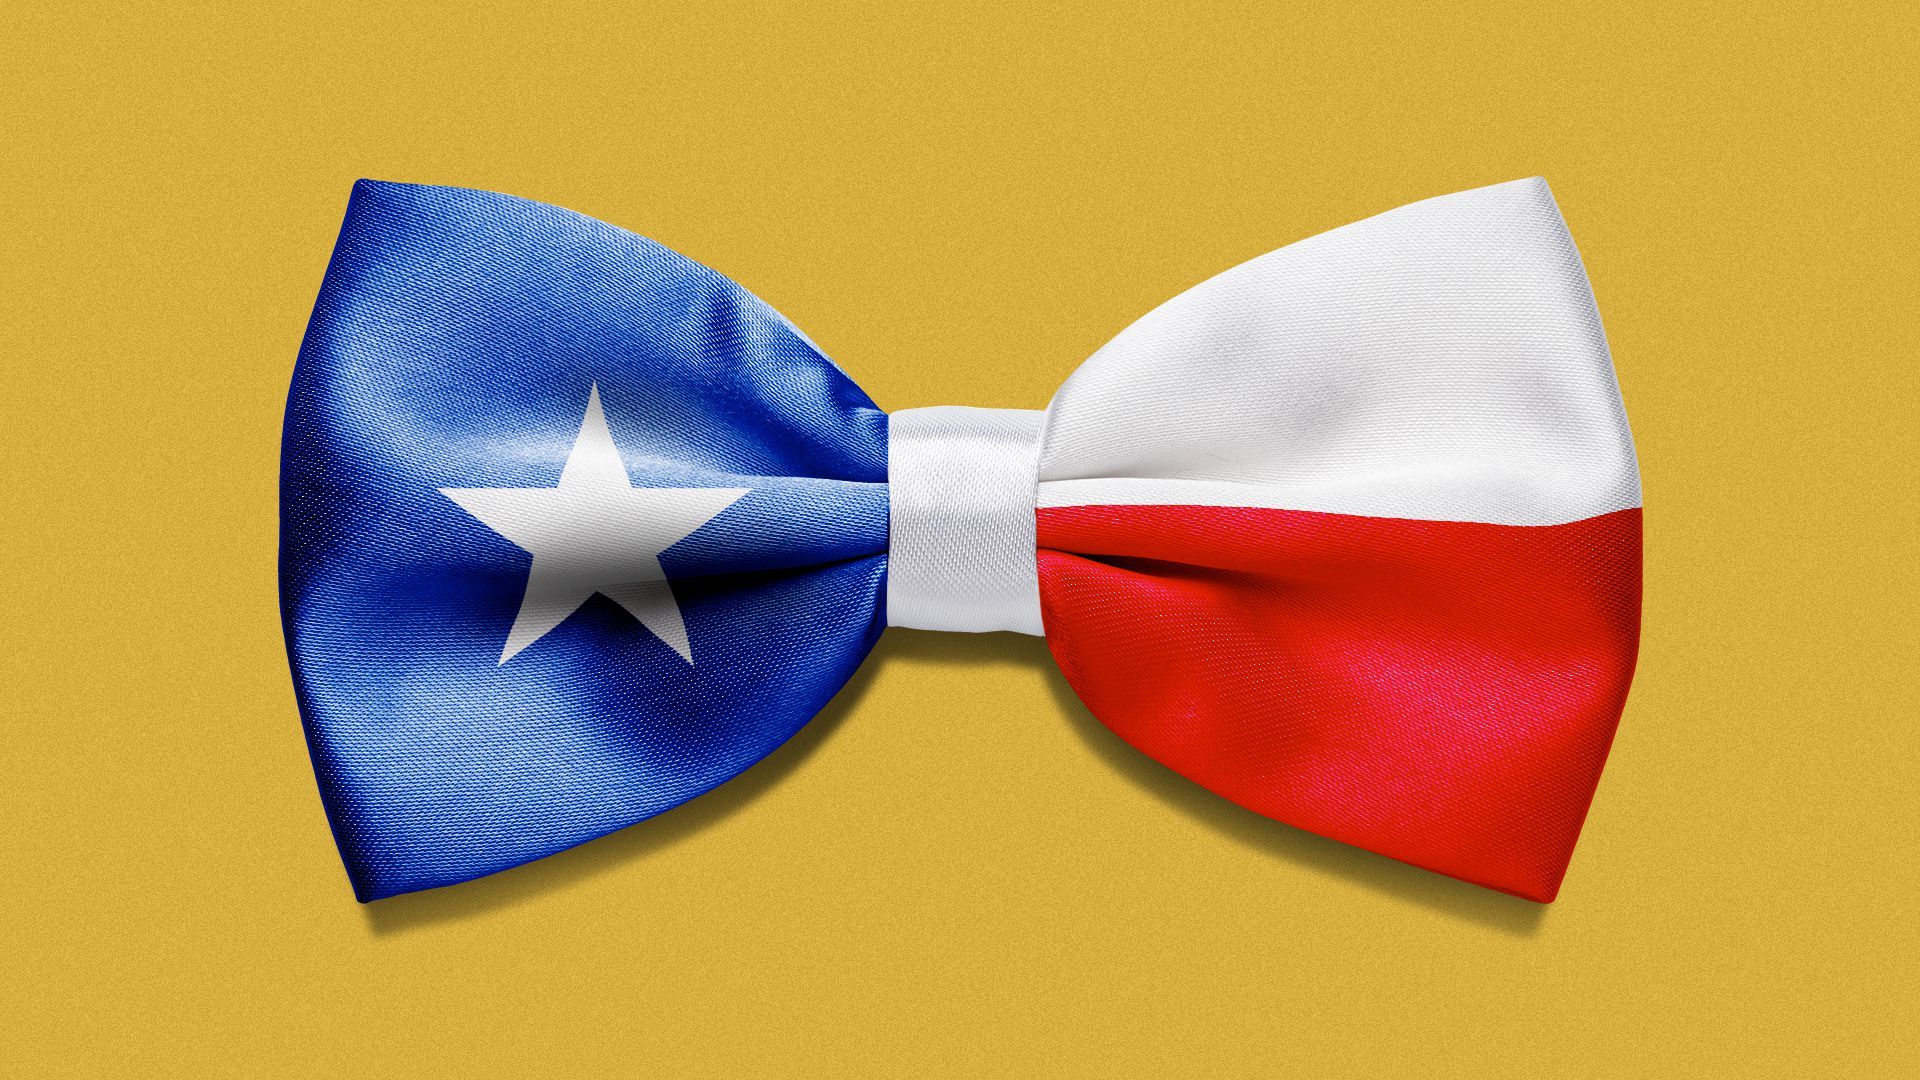 Illustration of a bow tie with a flag of Texas design.